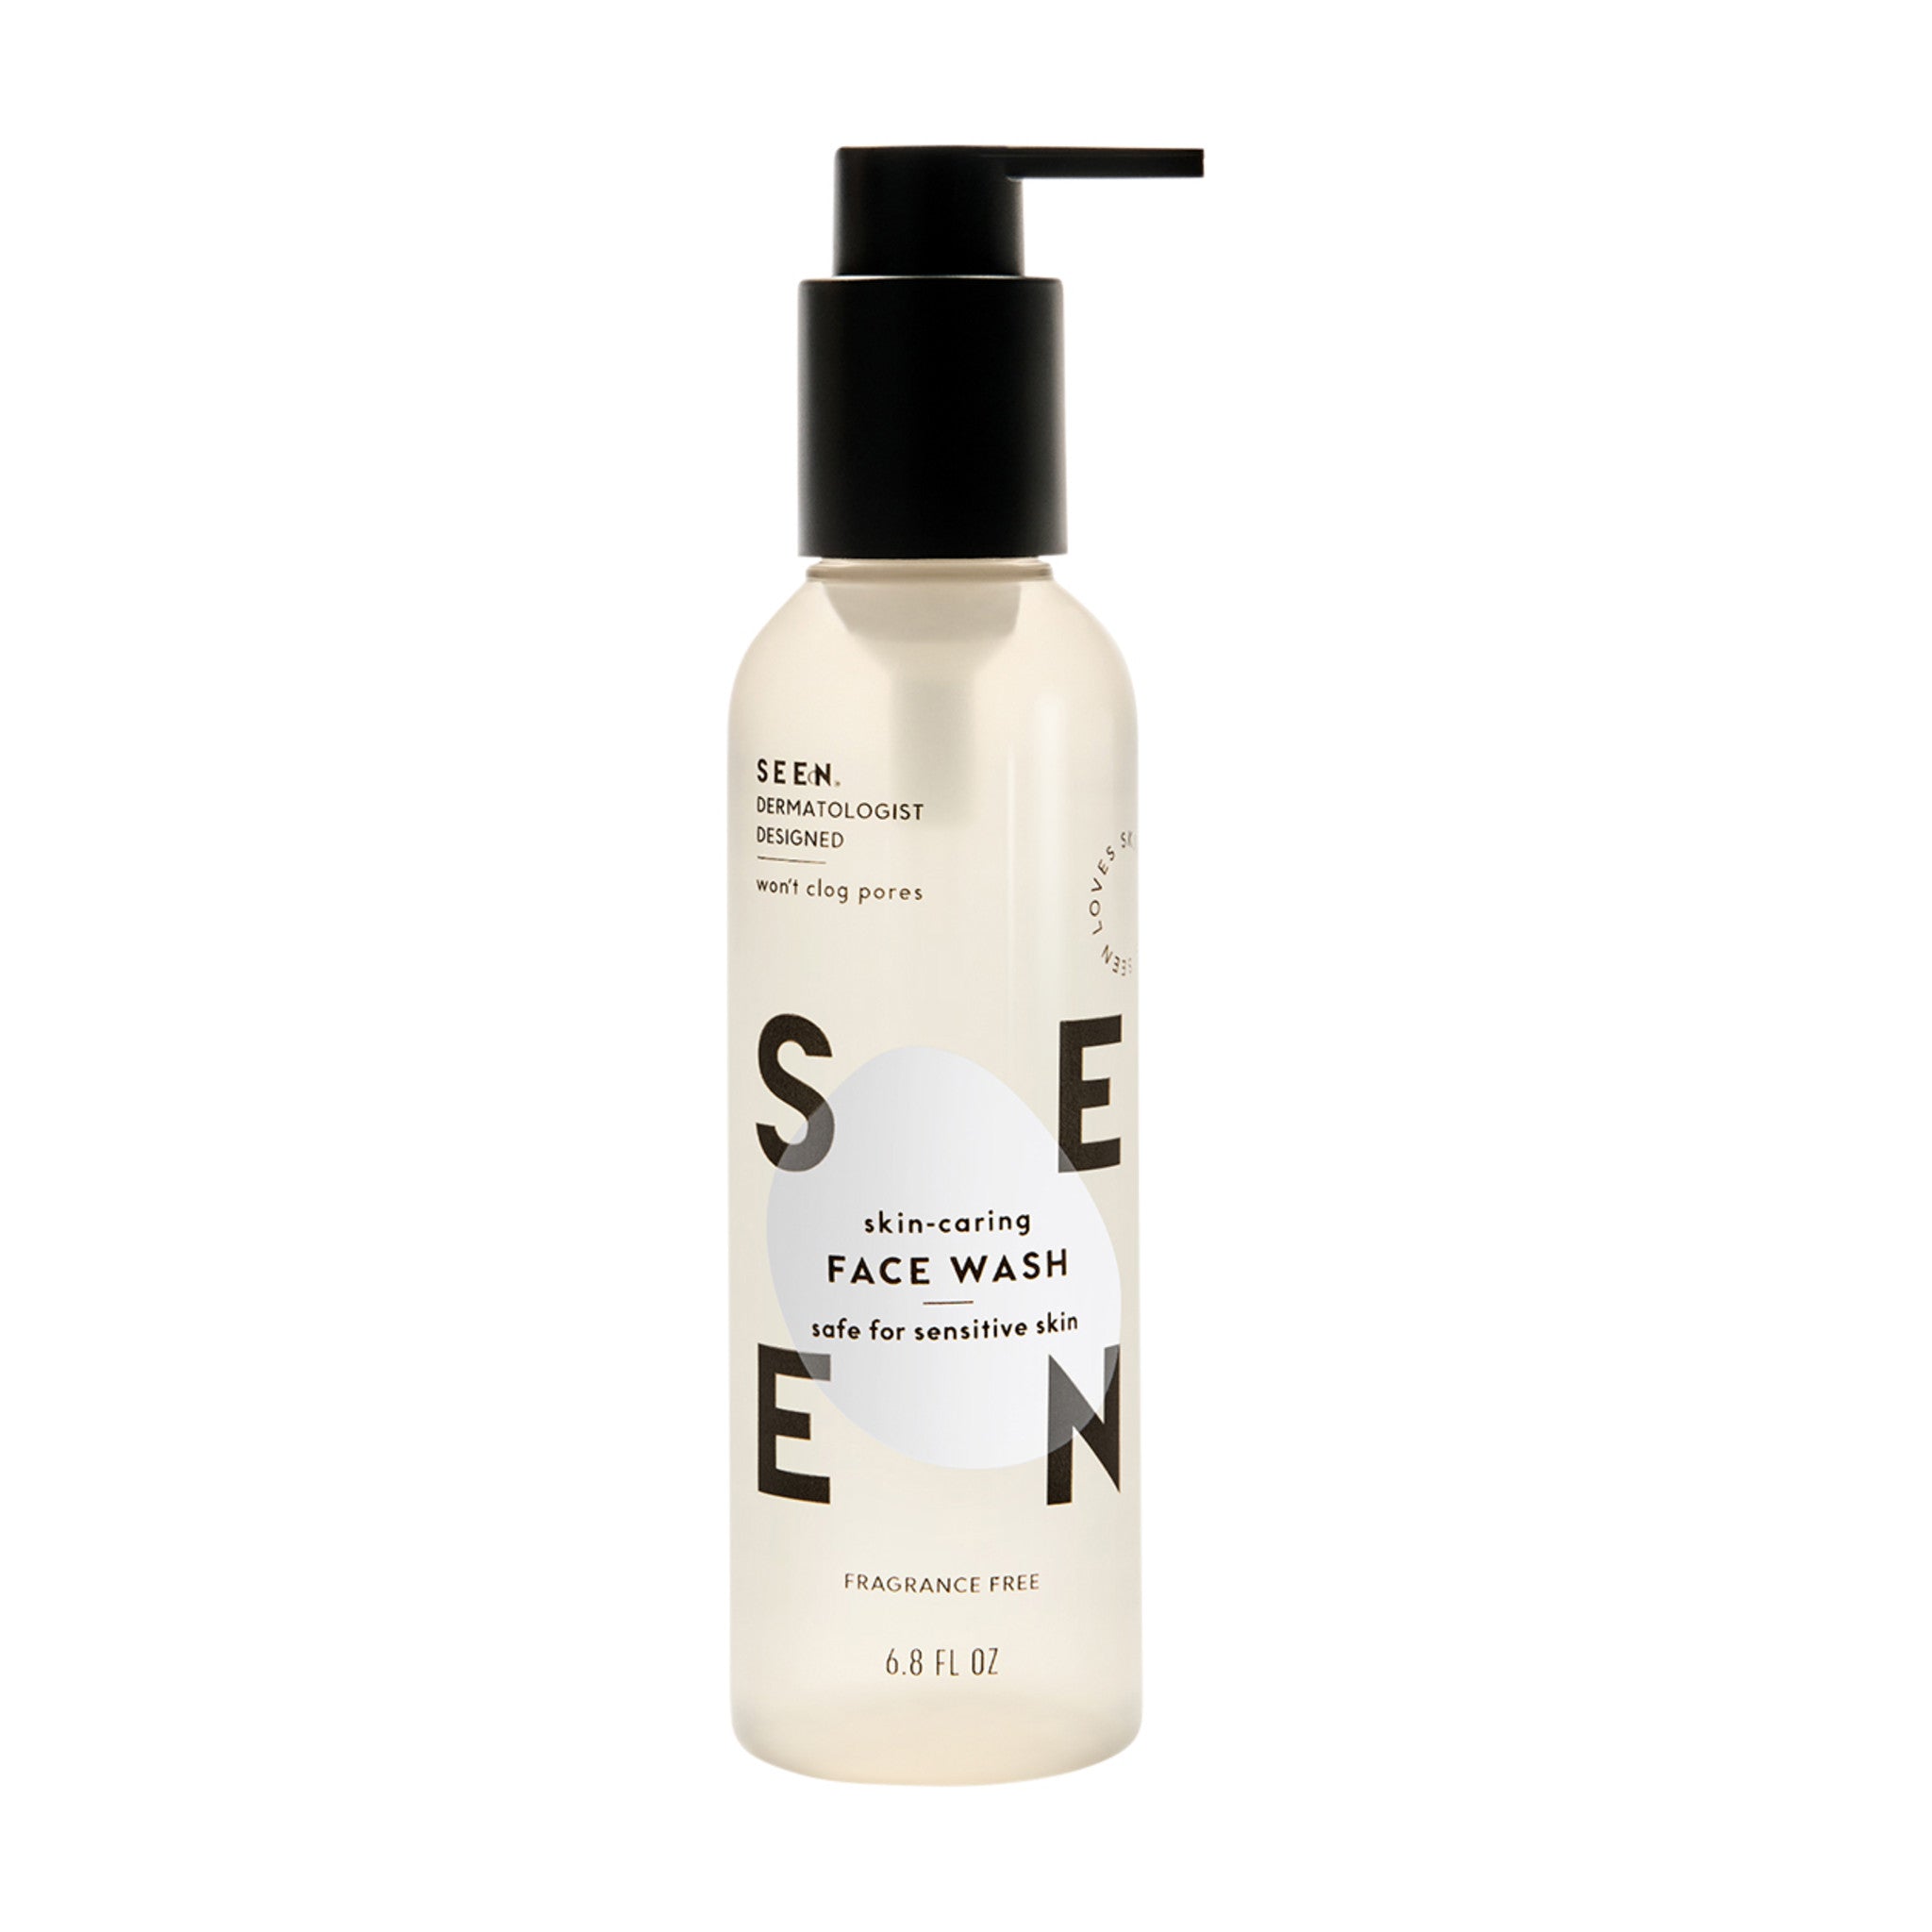 Seen Face Wash Fragrance-Free main image.